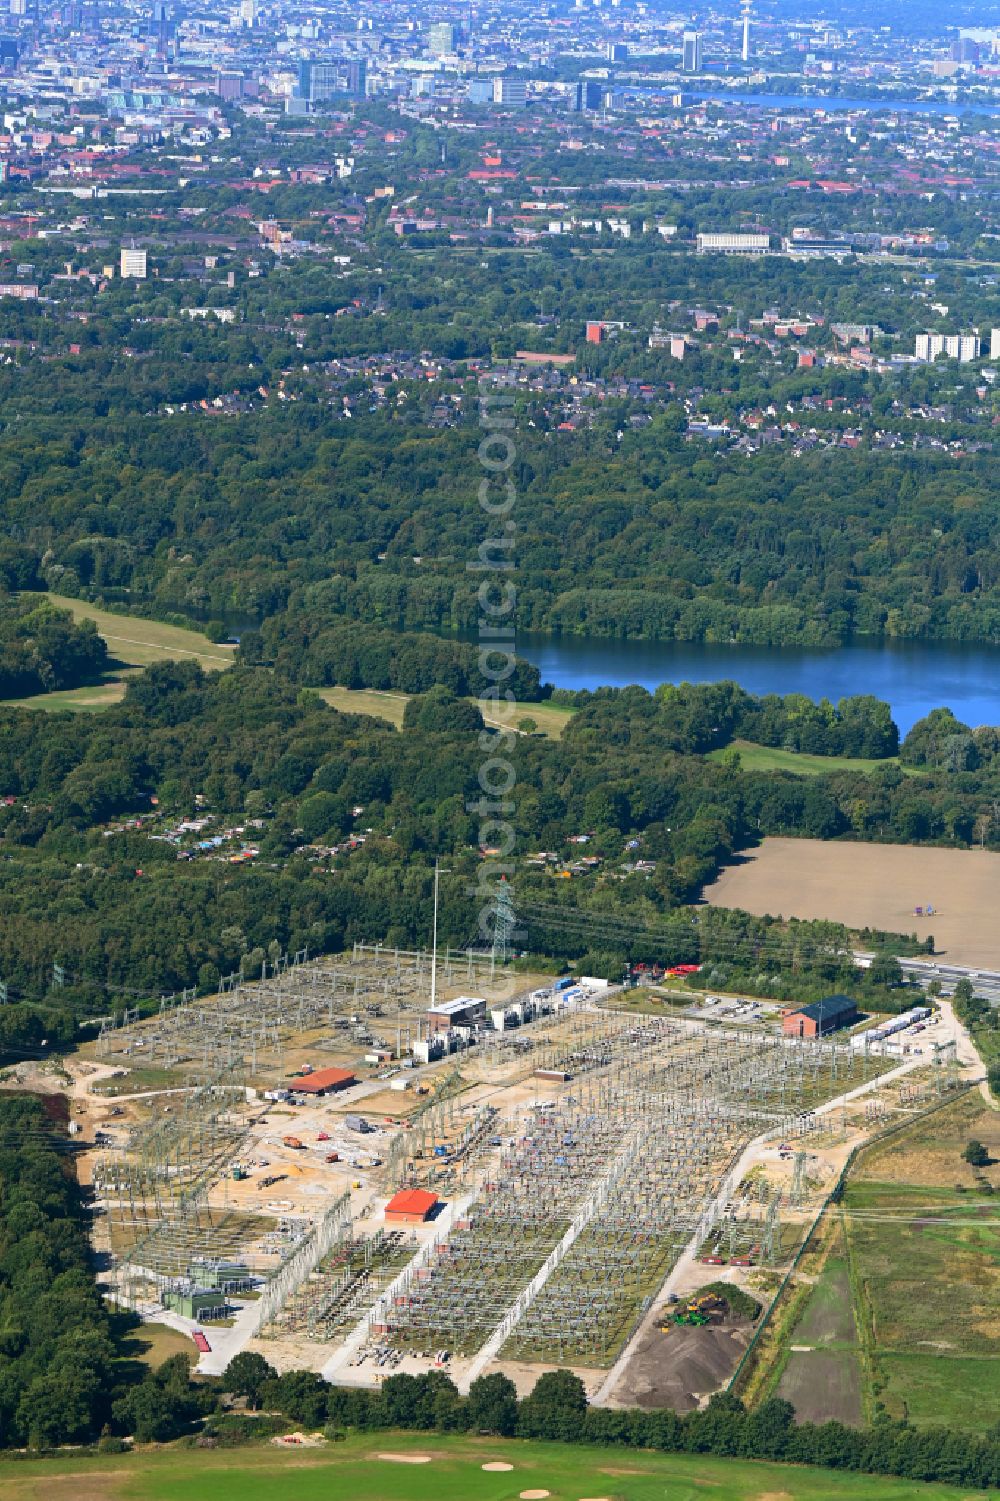 Aerial photograph Hamburg - Site of the substation for voltage conversion and electrical power supply on Hegenredder in the district Billstedt in Hamburg, Germany